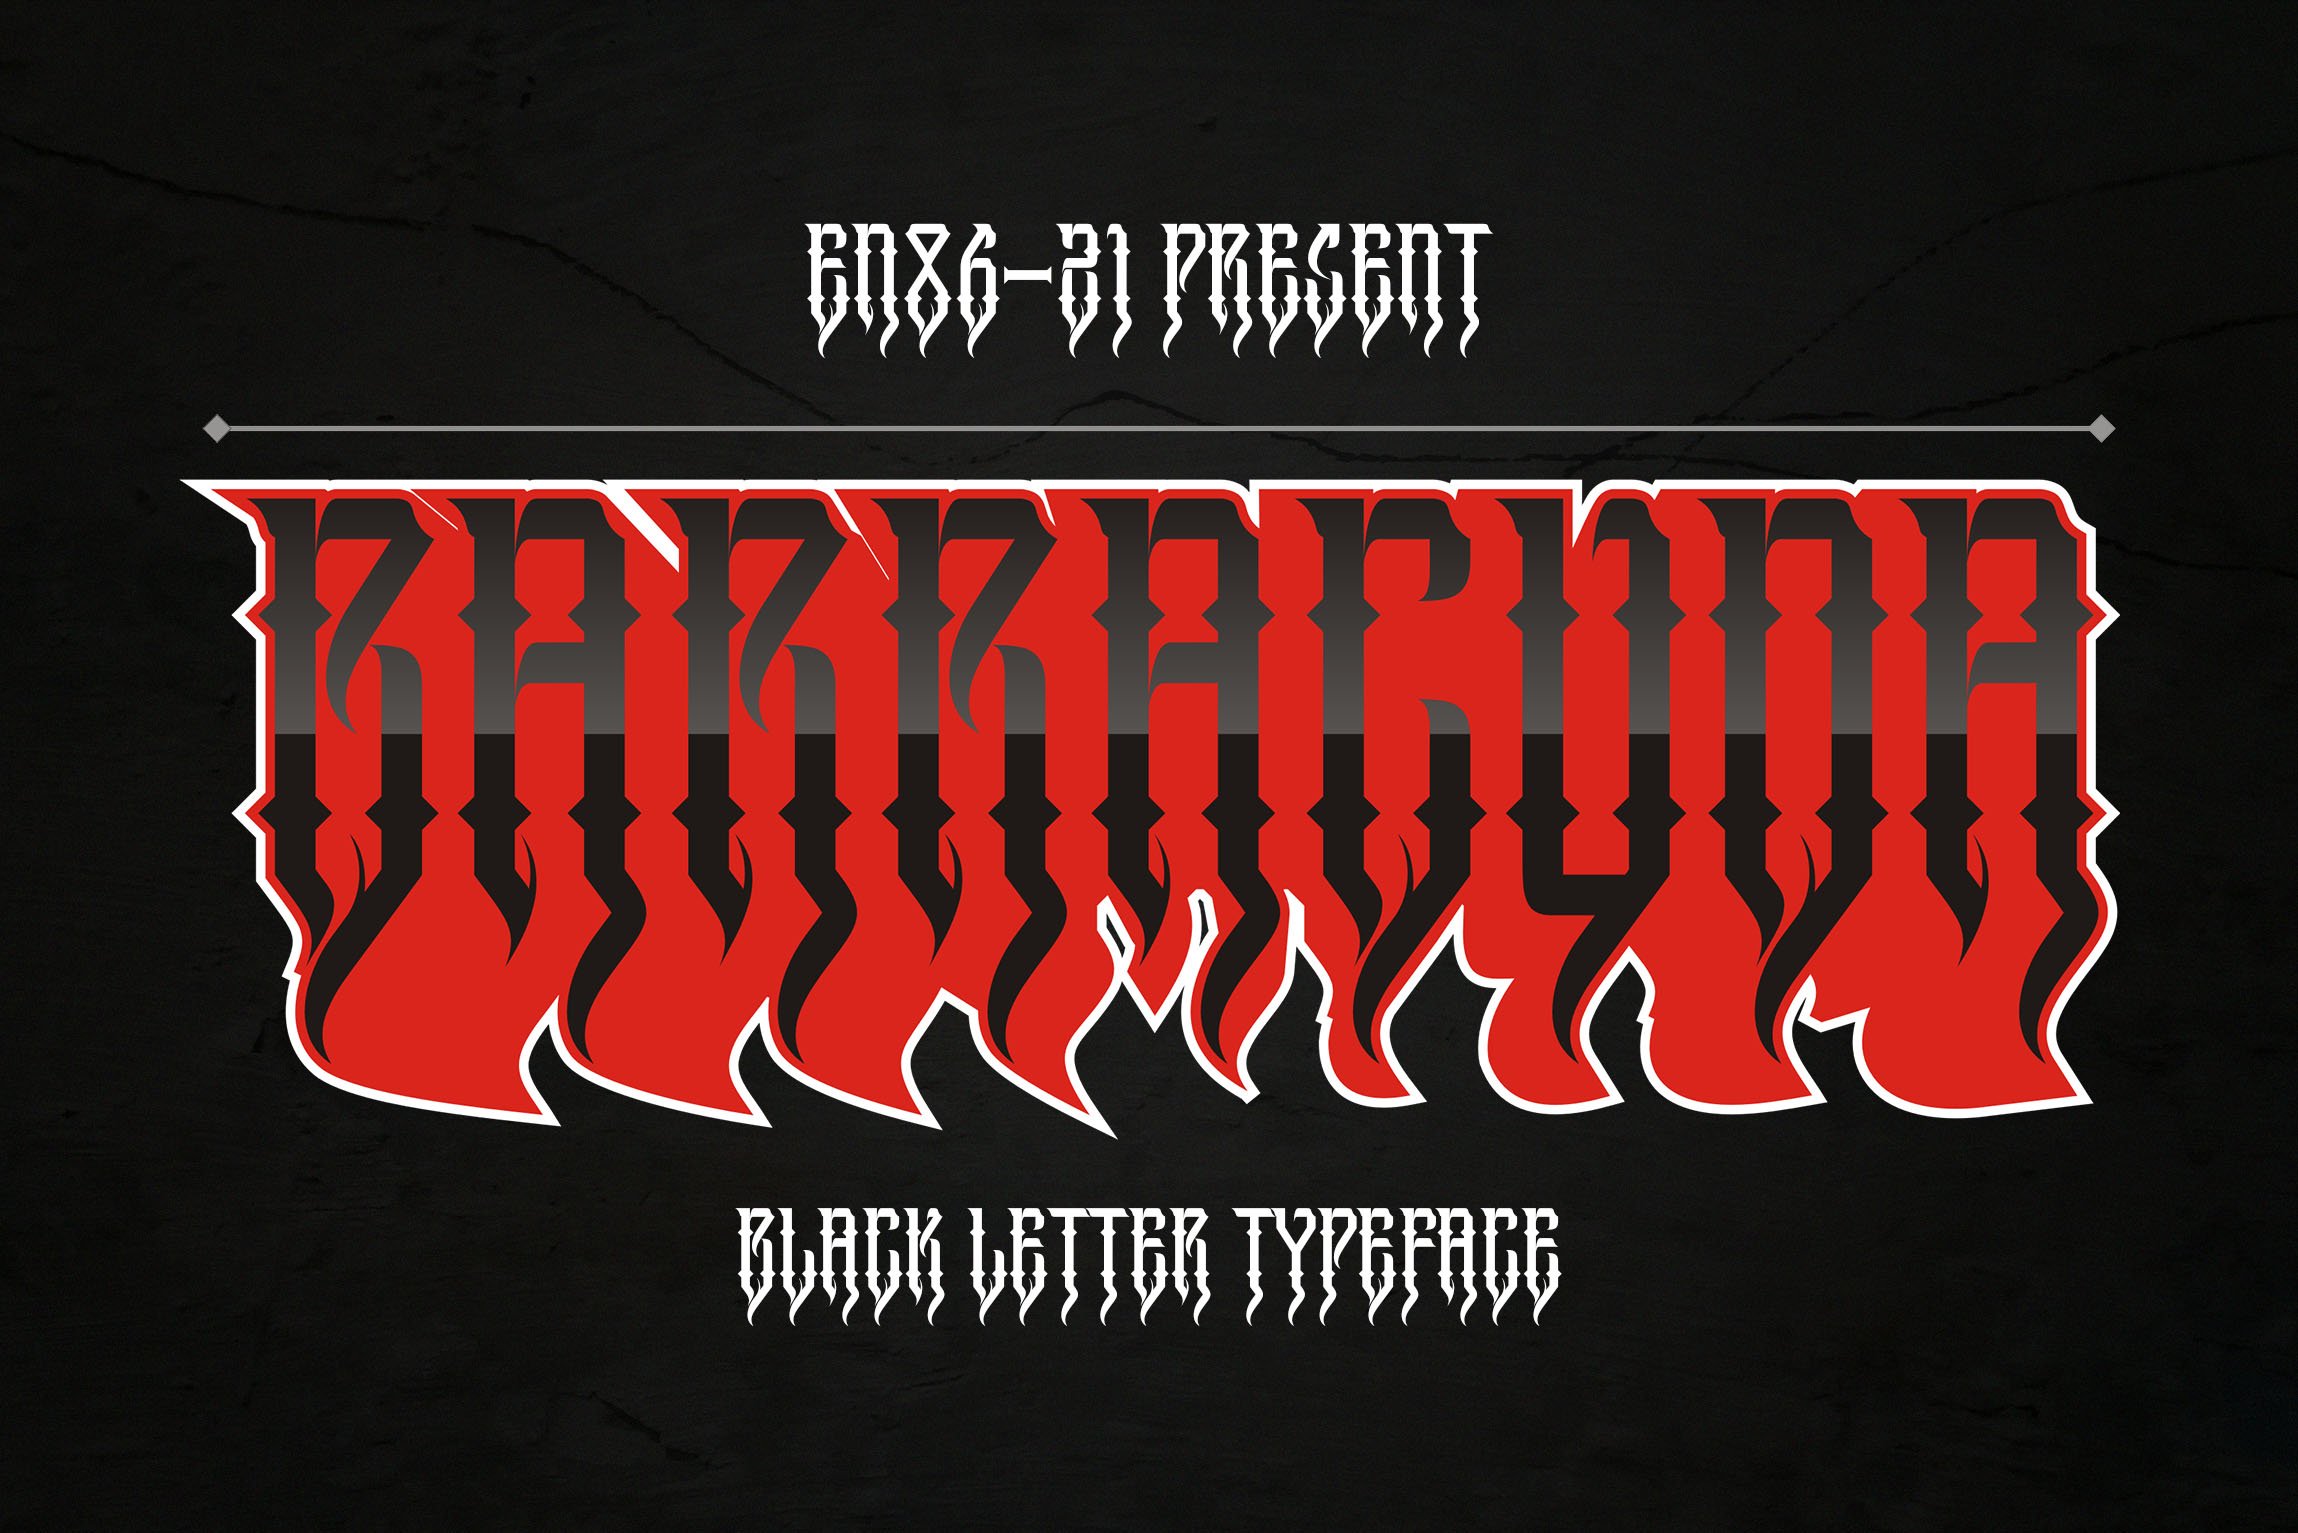 BARRACUDA TYPEFACE cover image.